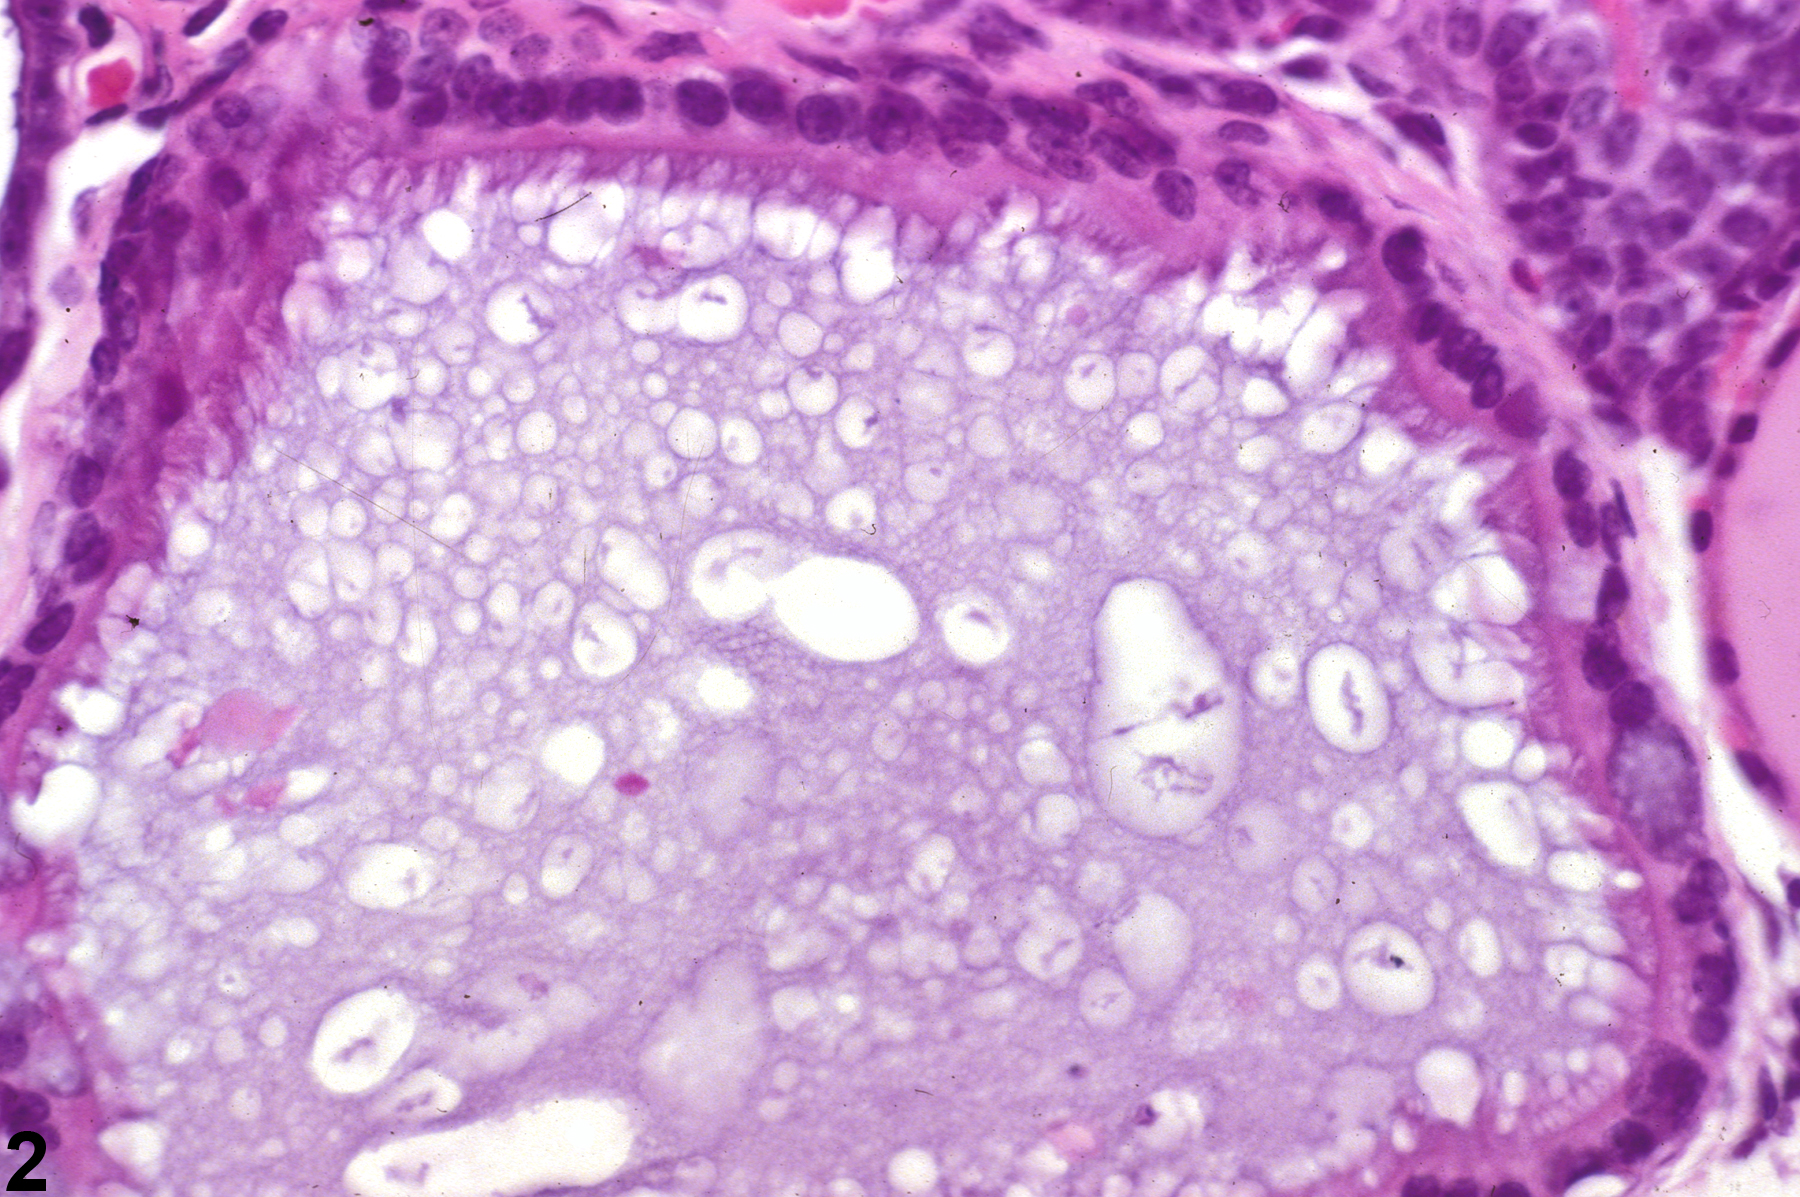 Image of cyst, congenital in the parathyroid gland from a male B6C3F1 mouse in a chronic study